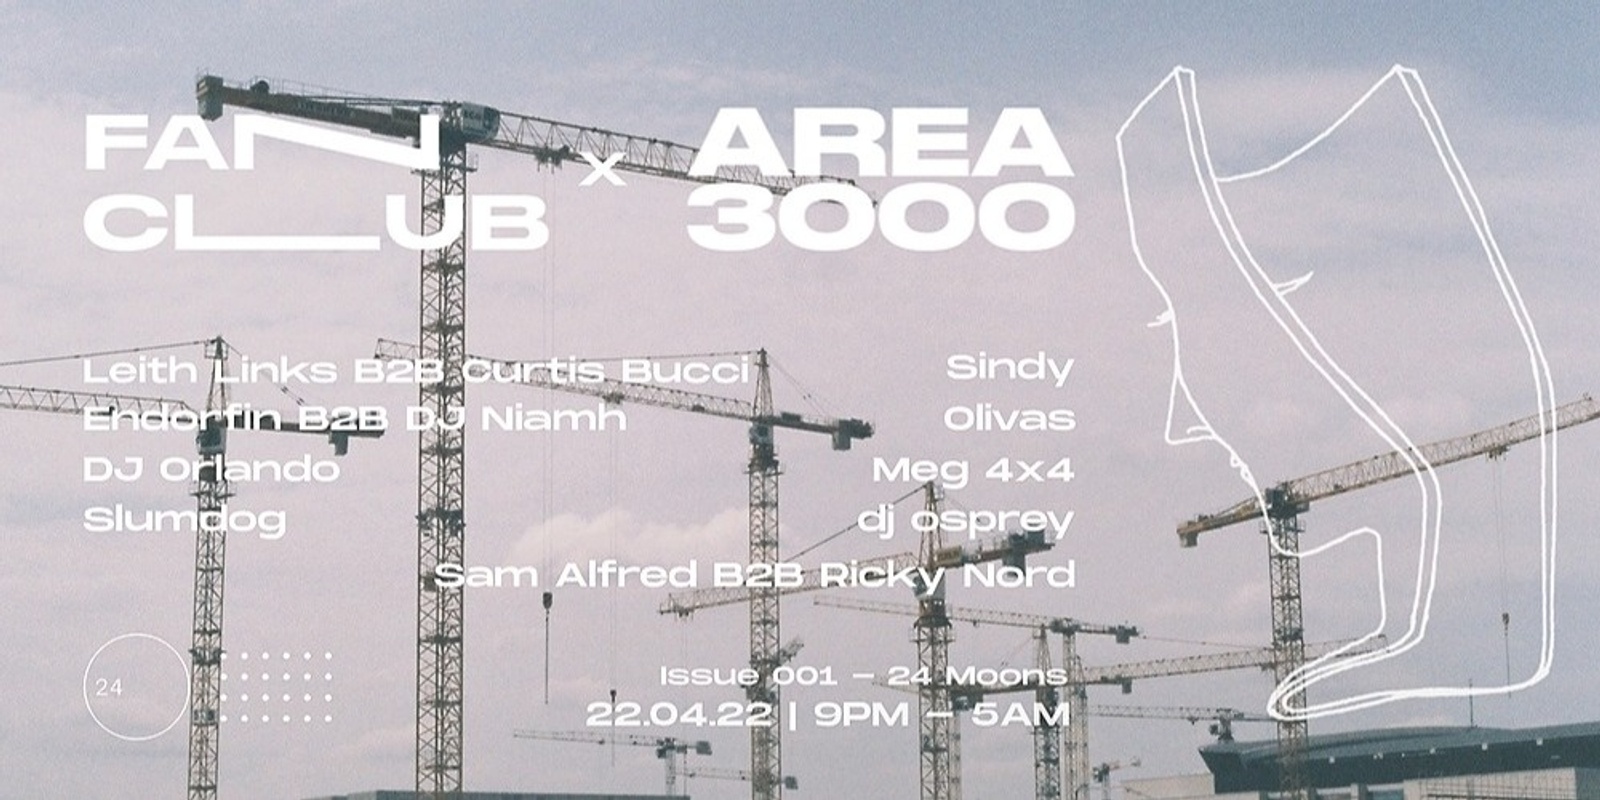 Banner image for Fan Club x Area 3000 - Issue 001